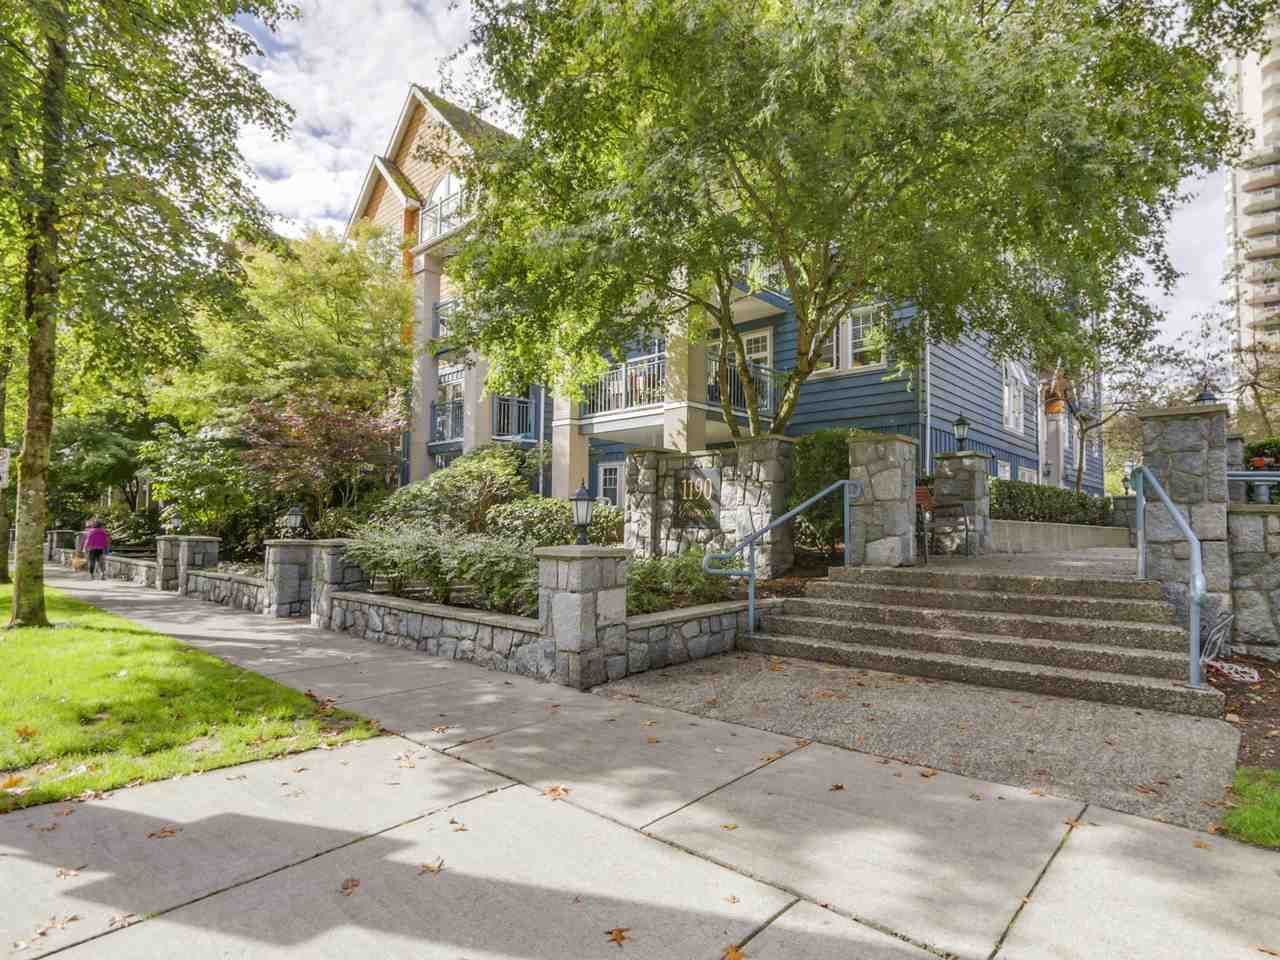 Main Photo: 304 1190 EASTWOOD STREET in Coquitlam: North Coquitlam Condo for sale : MLS®# R2112295